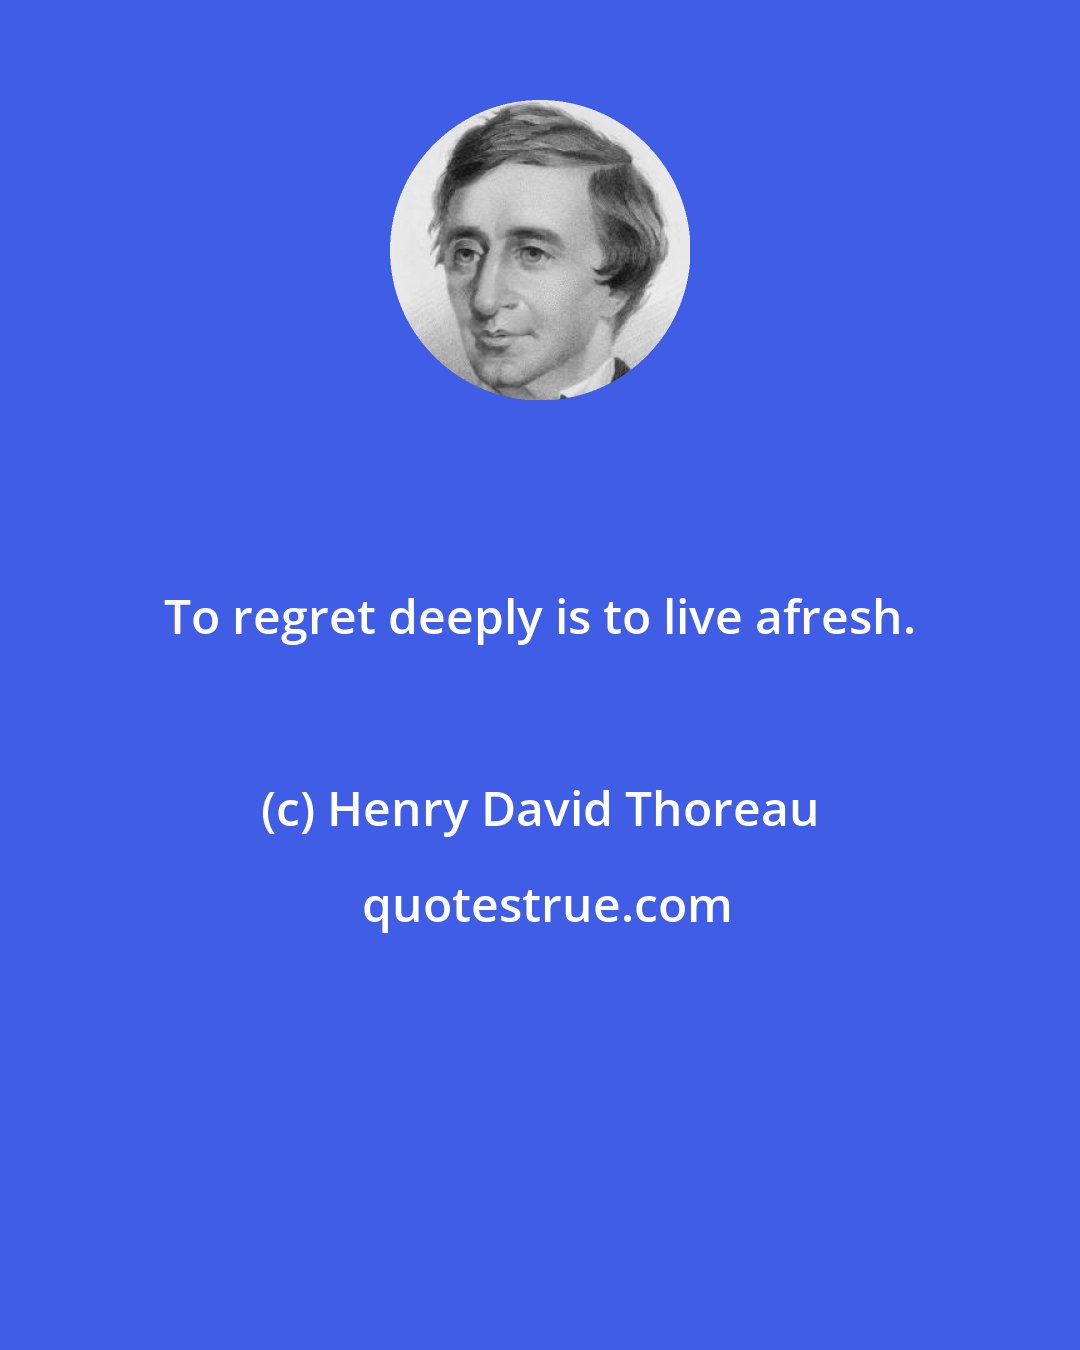 Henry David Thoreau: To regret deeply is to live afresh.